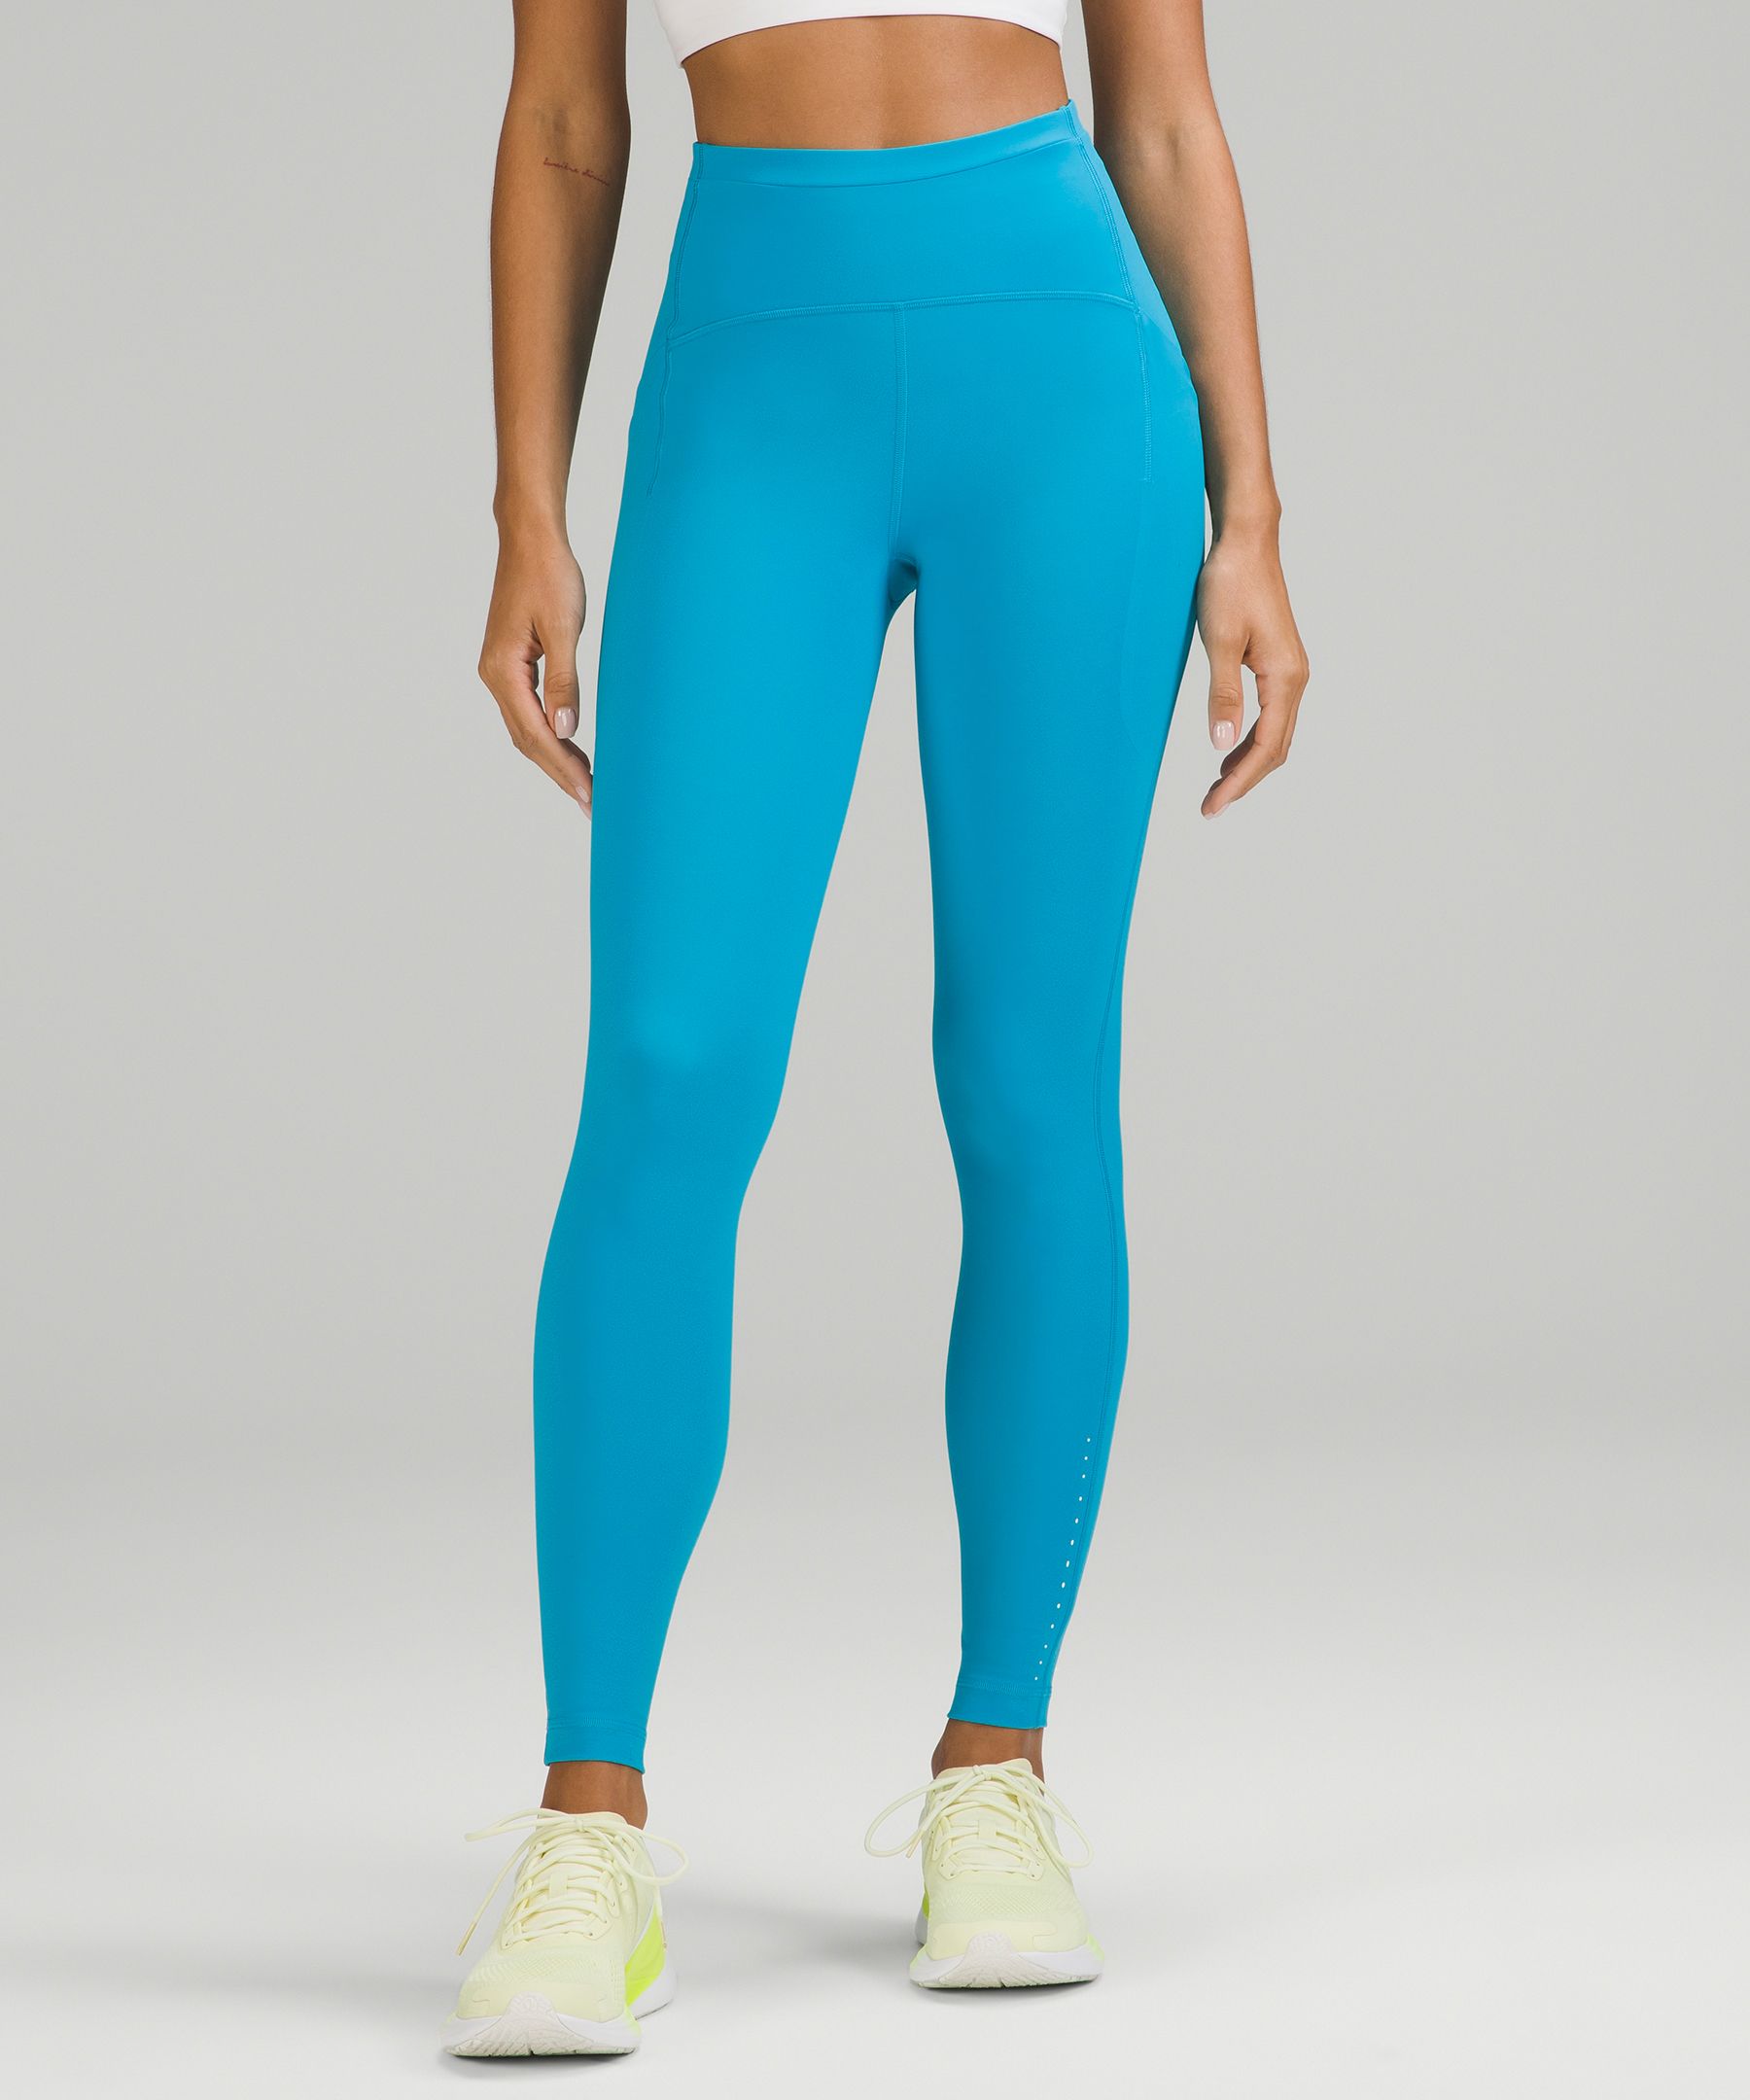 Lululemon athletica Swift Speed High-Rise Tight 28 *Brushed Luxtreme, Women's  Leggings/Tights